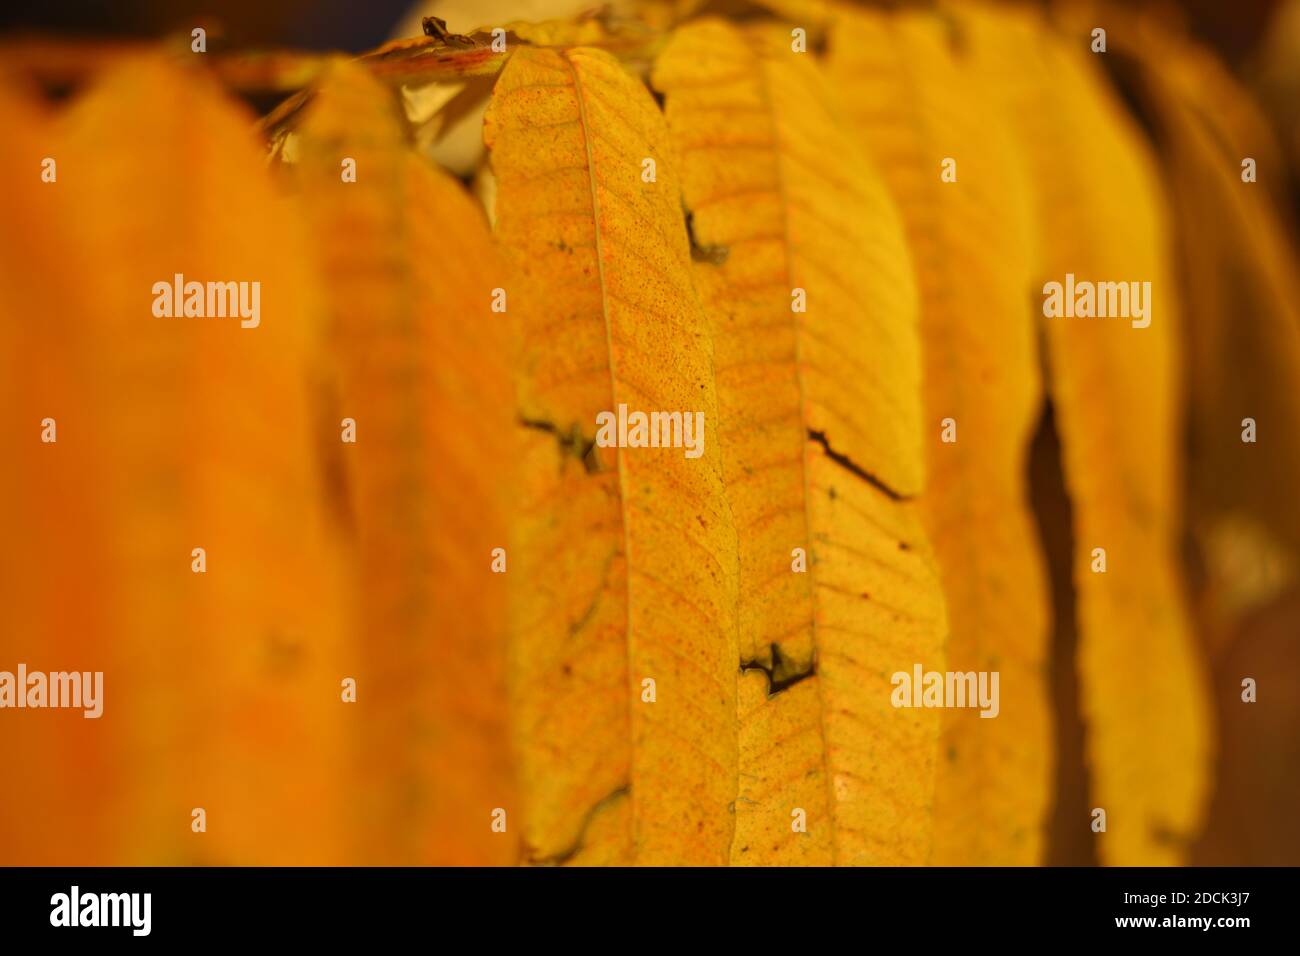 Closeup view of yellow autumn leaves on a branch in a row Stock Photo